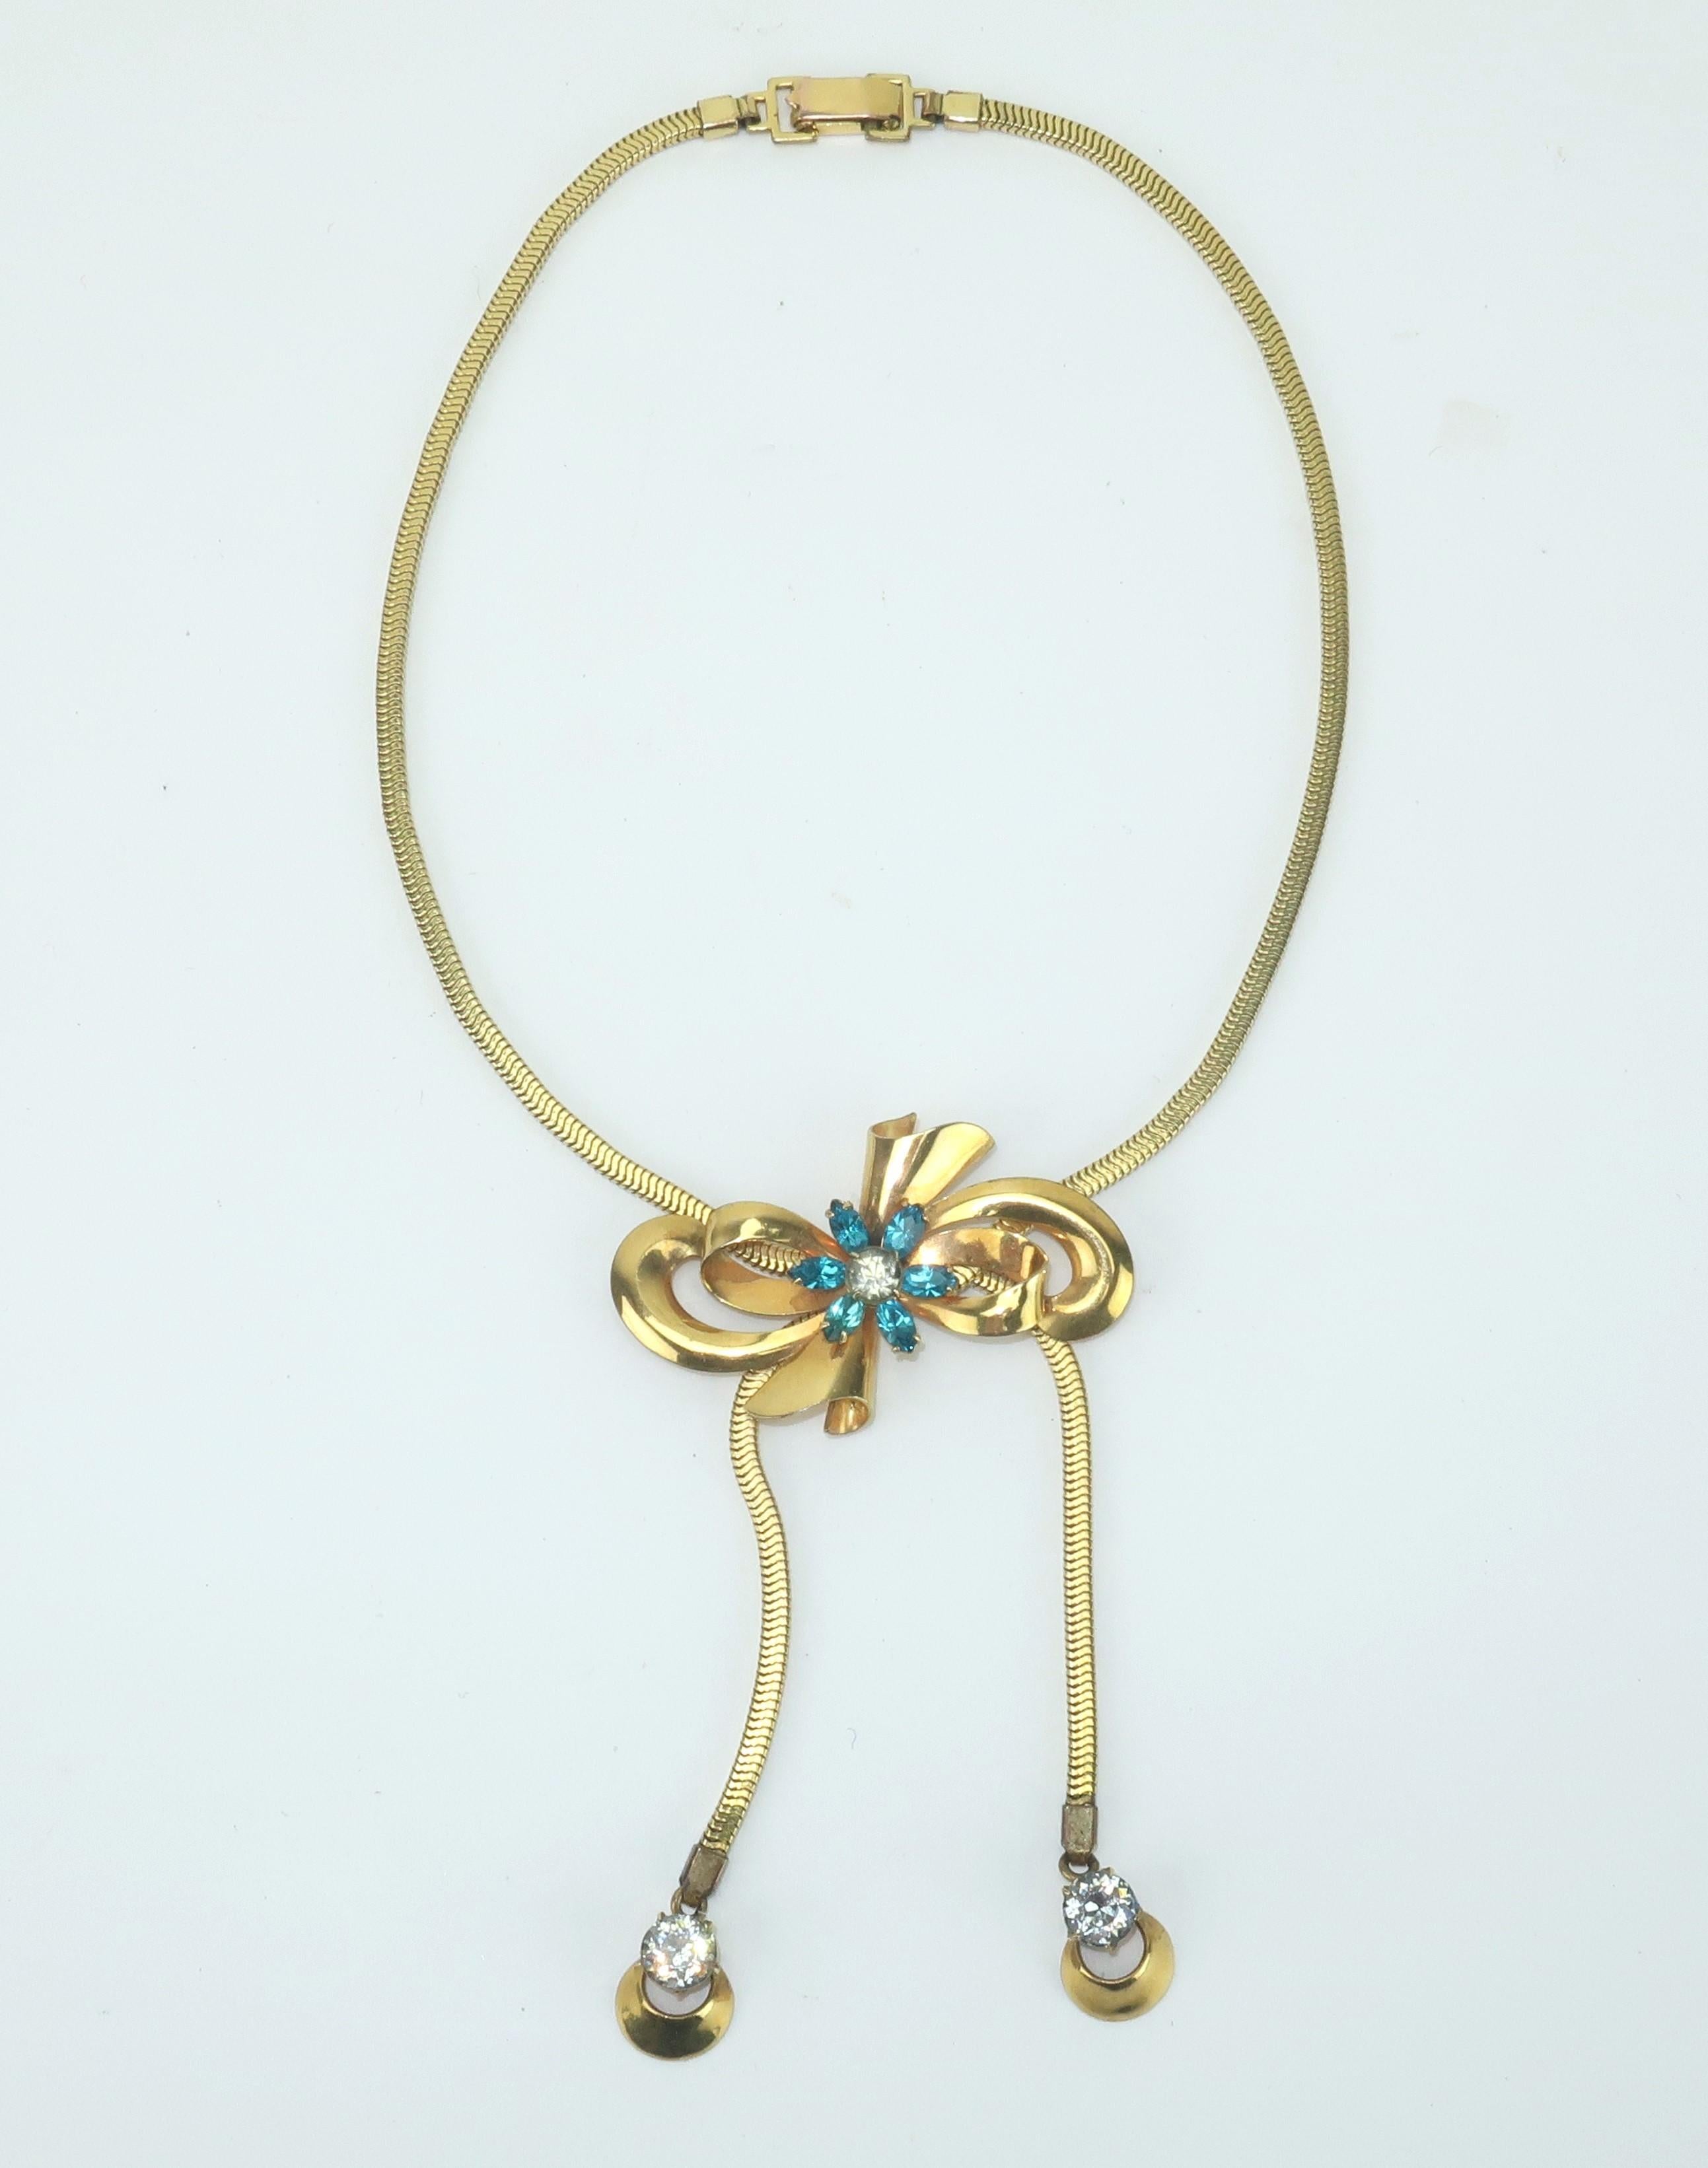 Charming 1940's lariat style slide necklace by the American jewelry company, Carl-Art.  The necklace has a girlish aesthetic with a 12K gold filled bow design accented by rhinestones in crystal and aqua blue.  The unique slide mechanism at the back